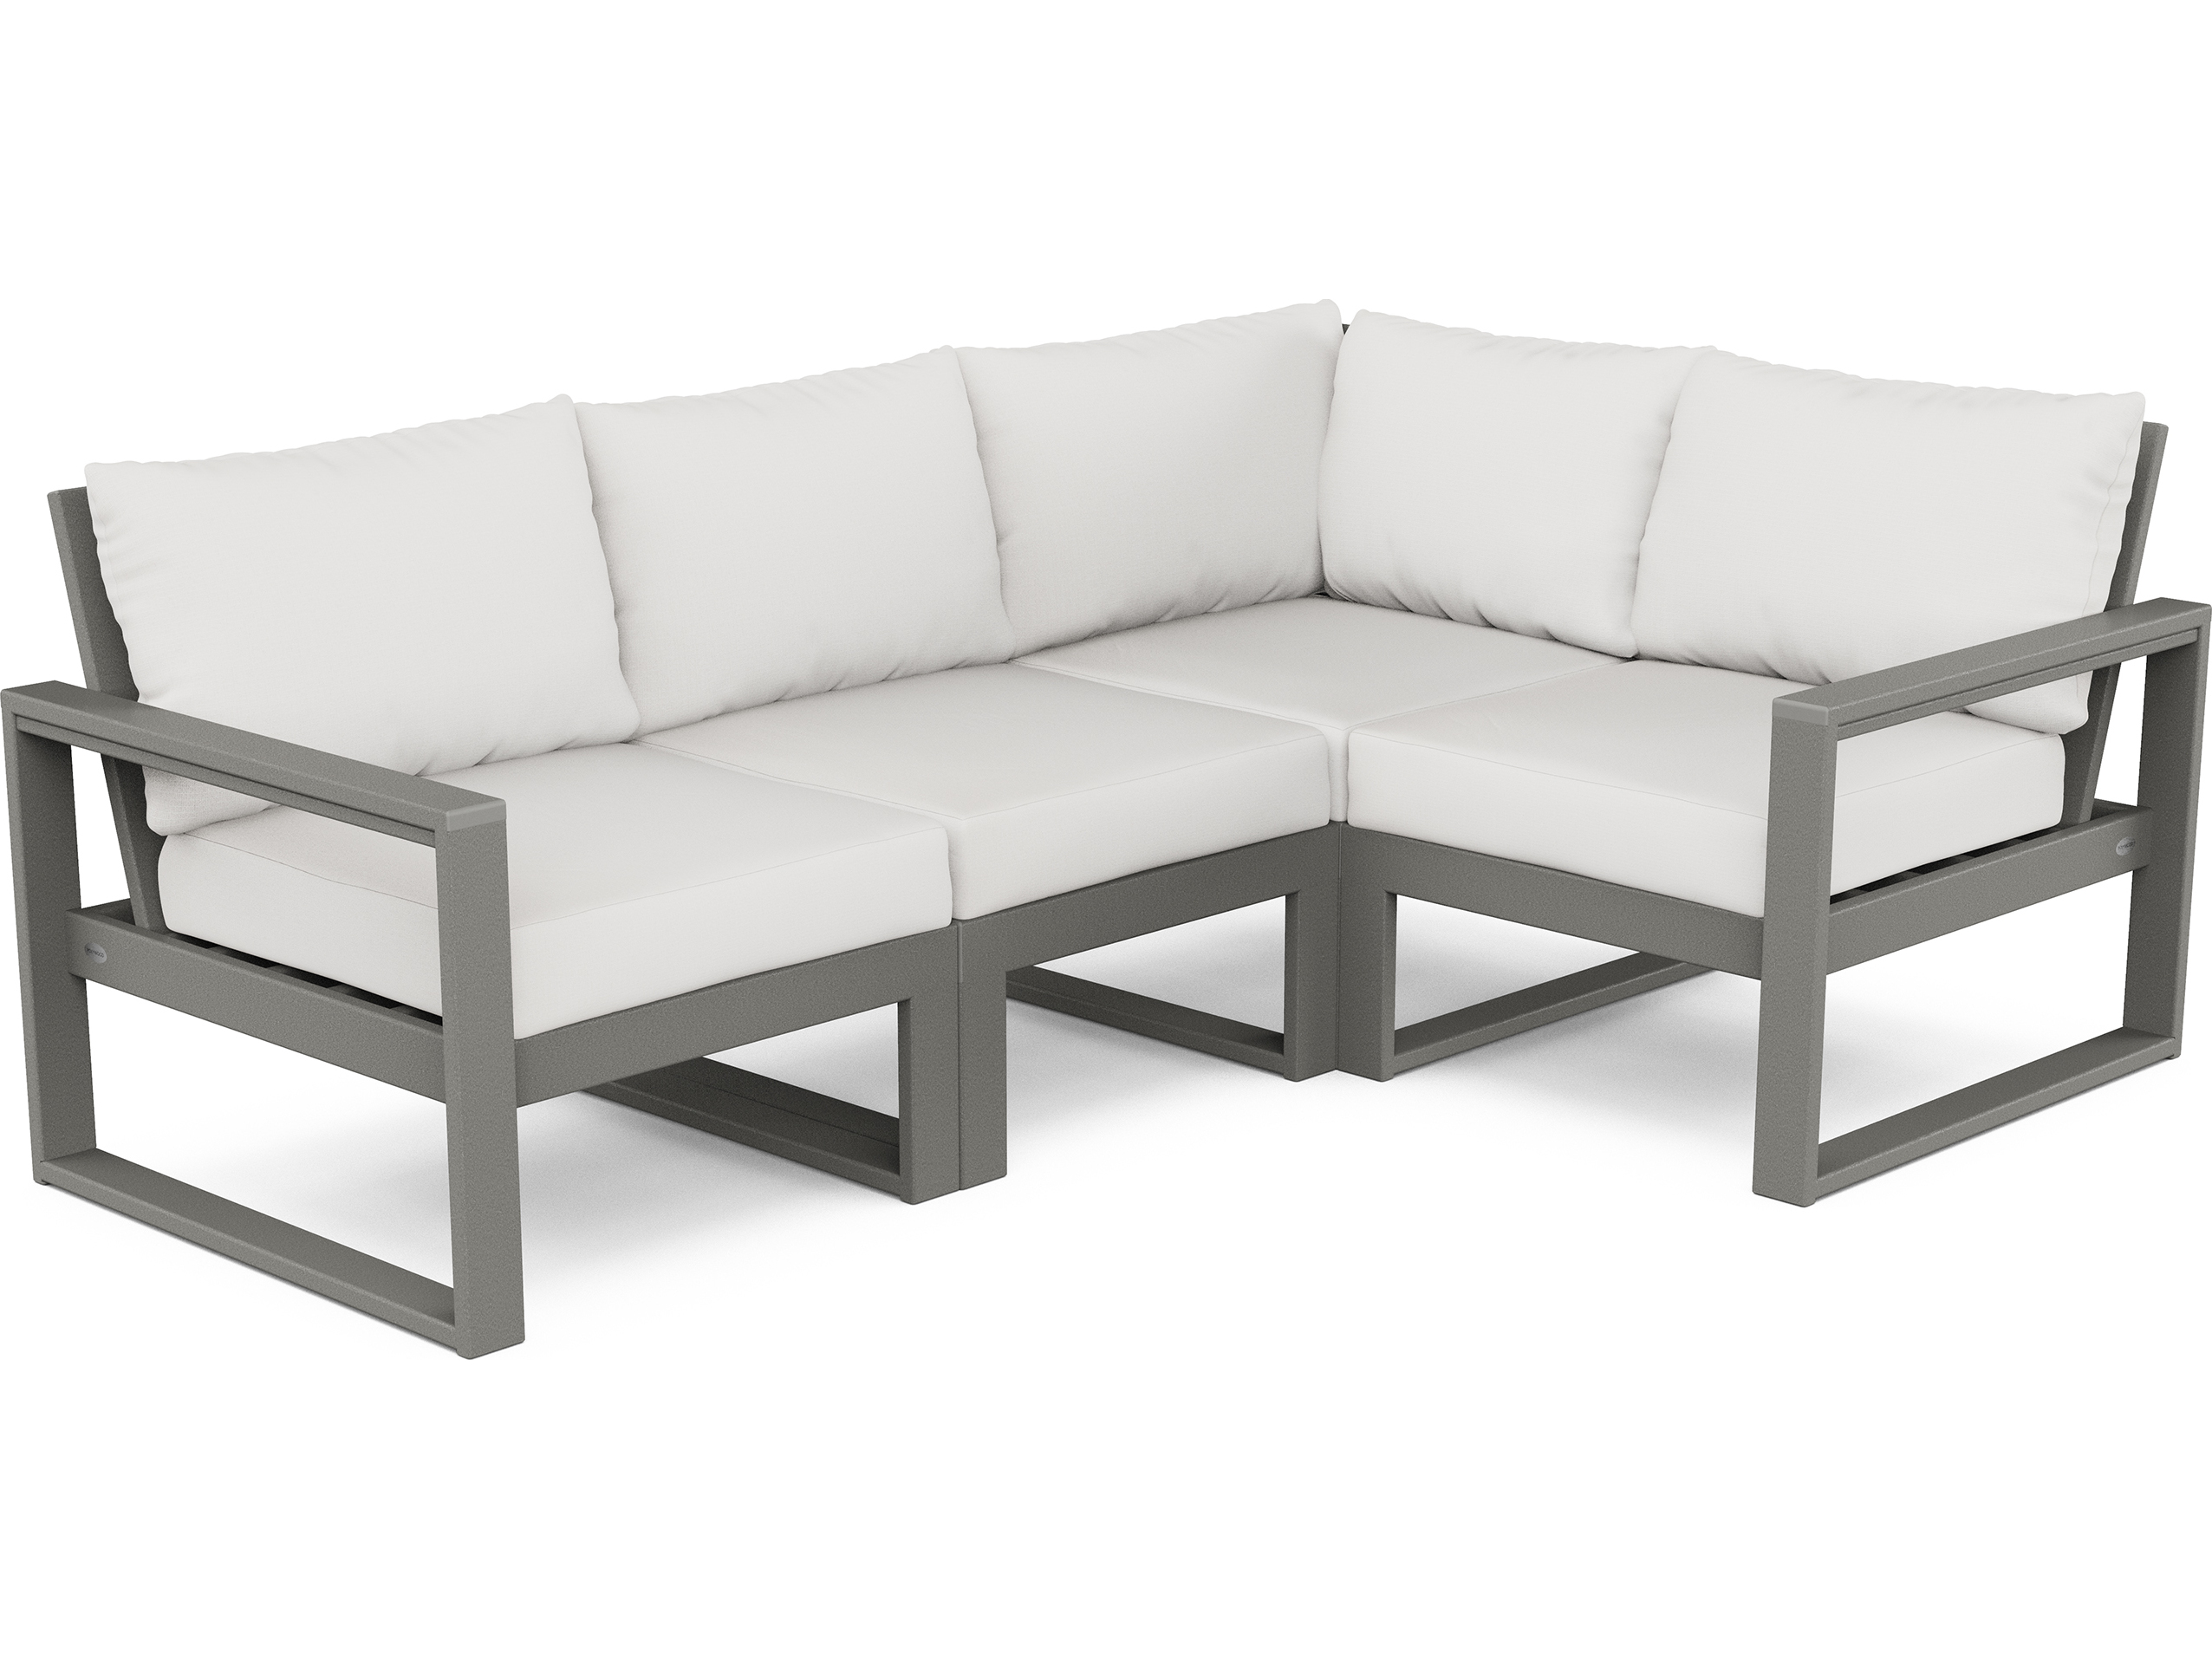 Recycled Plastic Deep Seating 4 Piece Sectional Lounge Set PWPWS5212